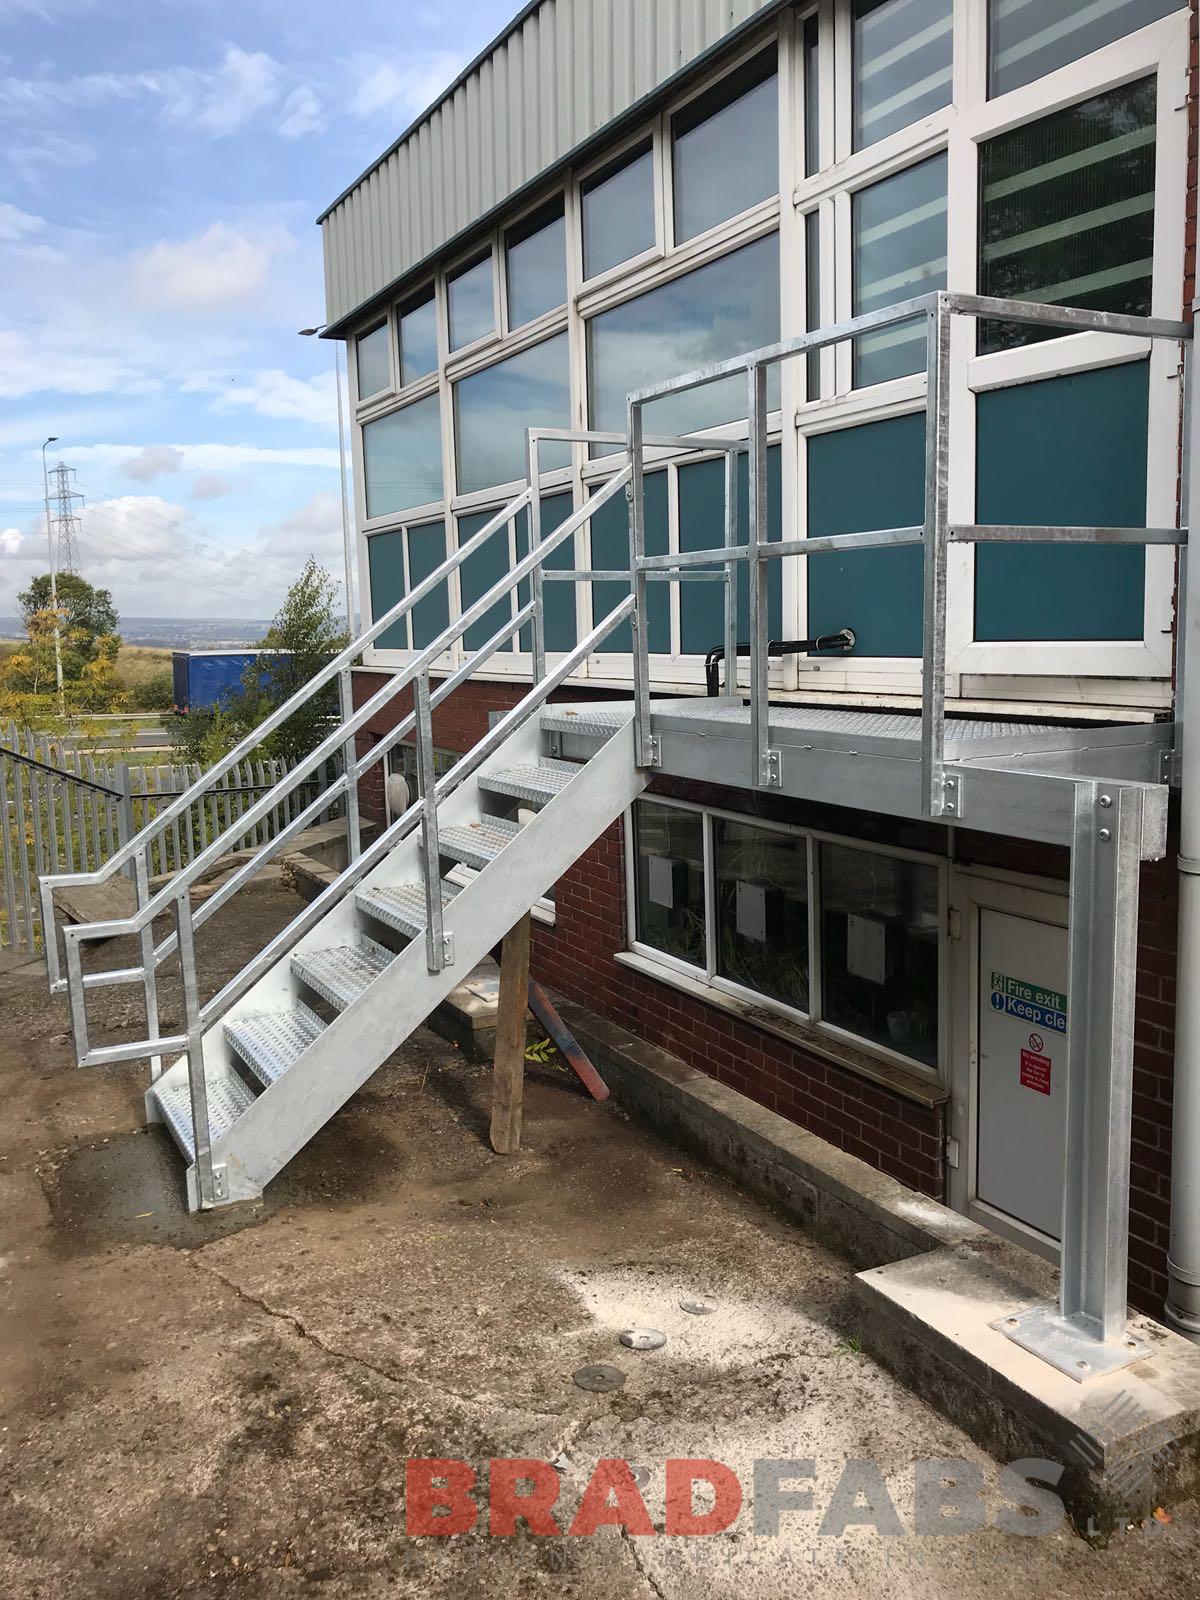 Small metal commercial fire escape designed fabricated and installed by Bradfabs